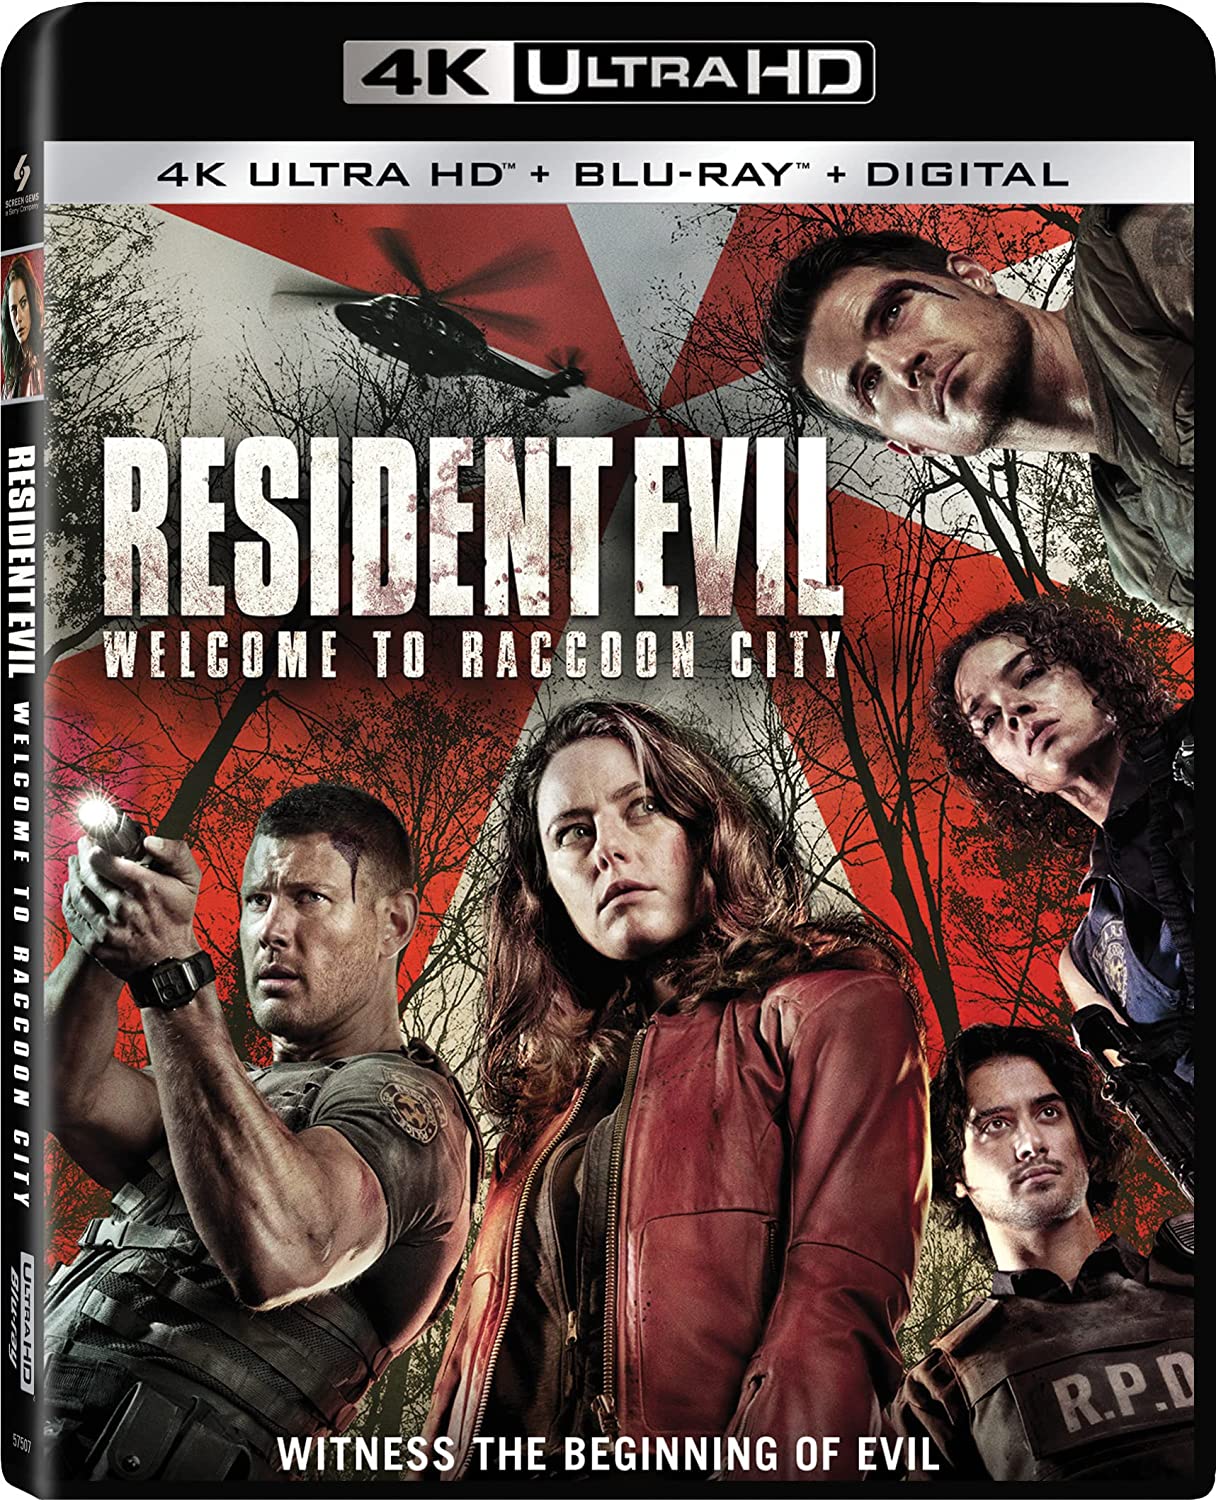 Resident Evil- Welcome To Raccoon City 4k Blu-ray